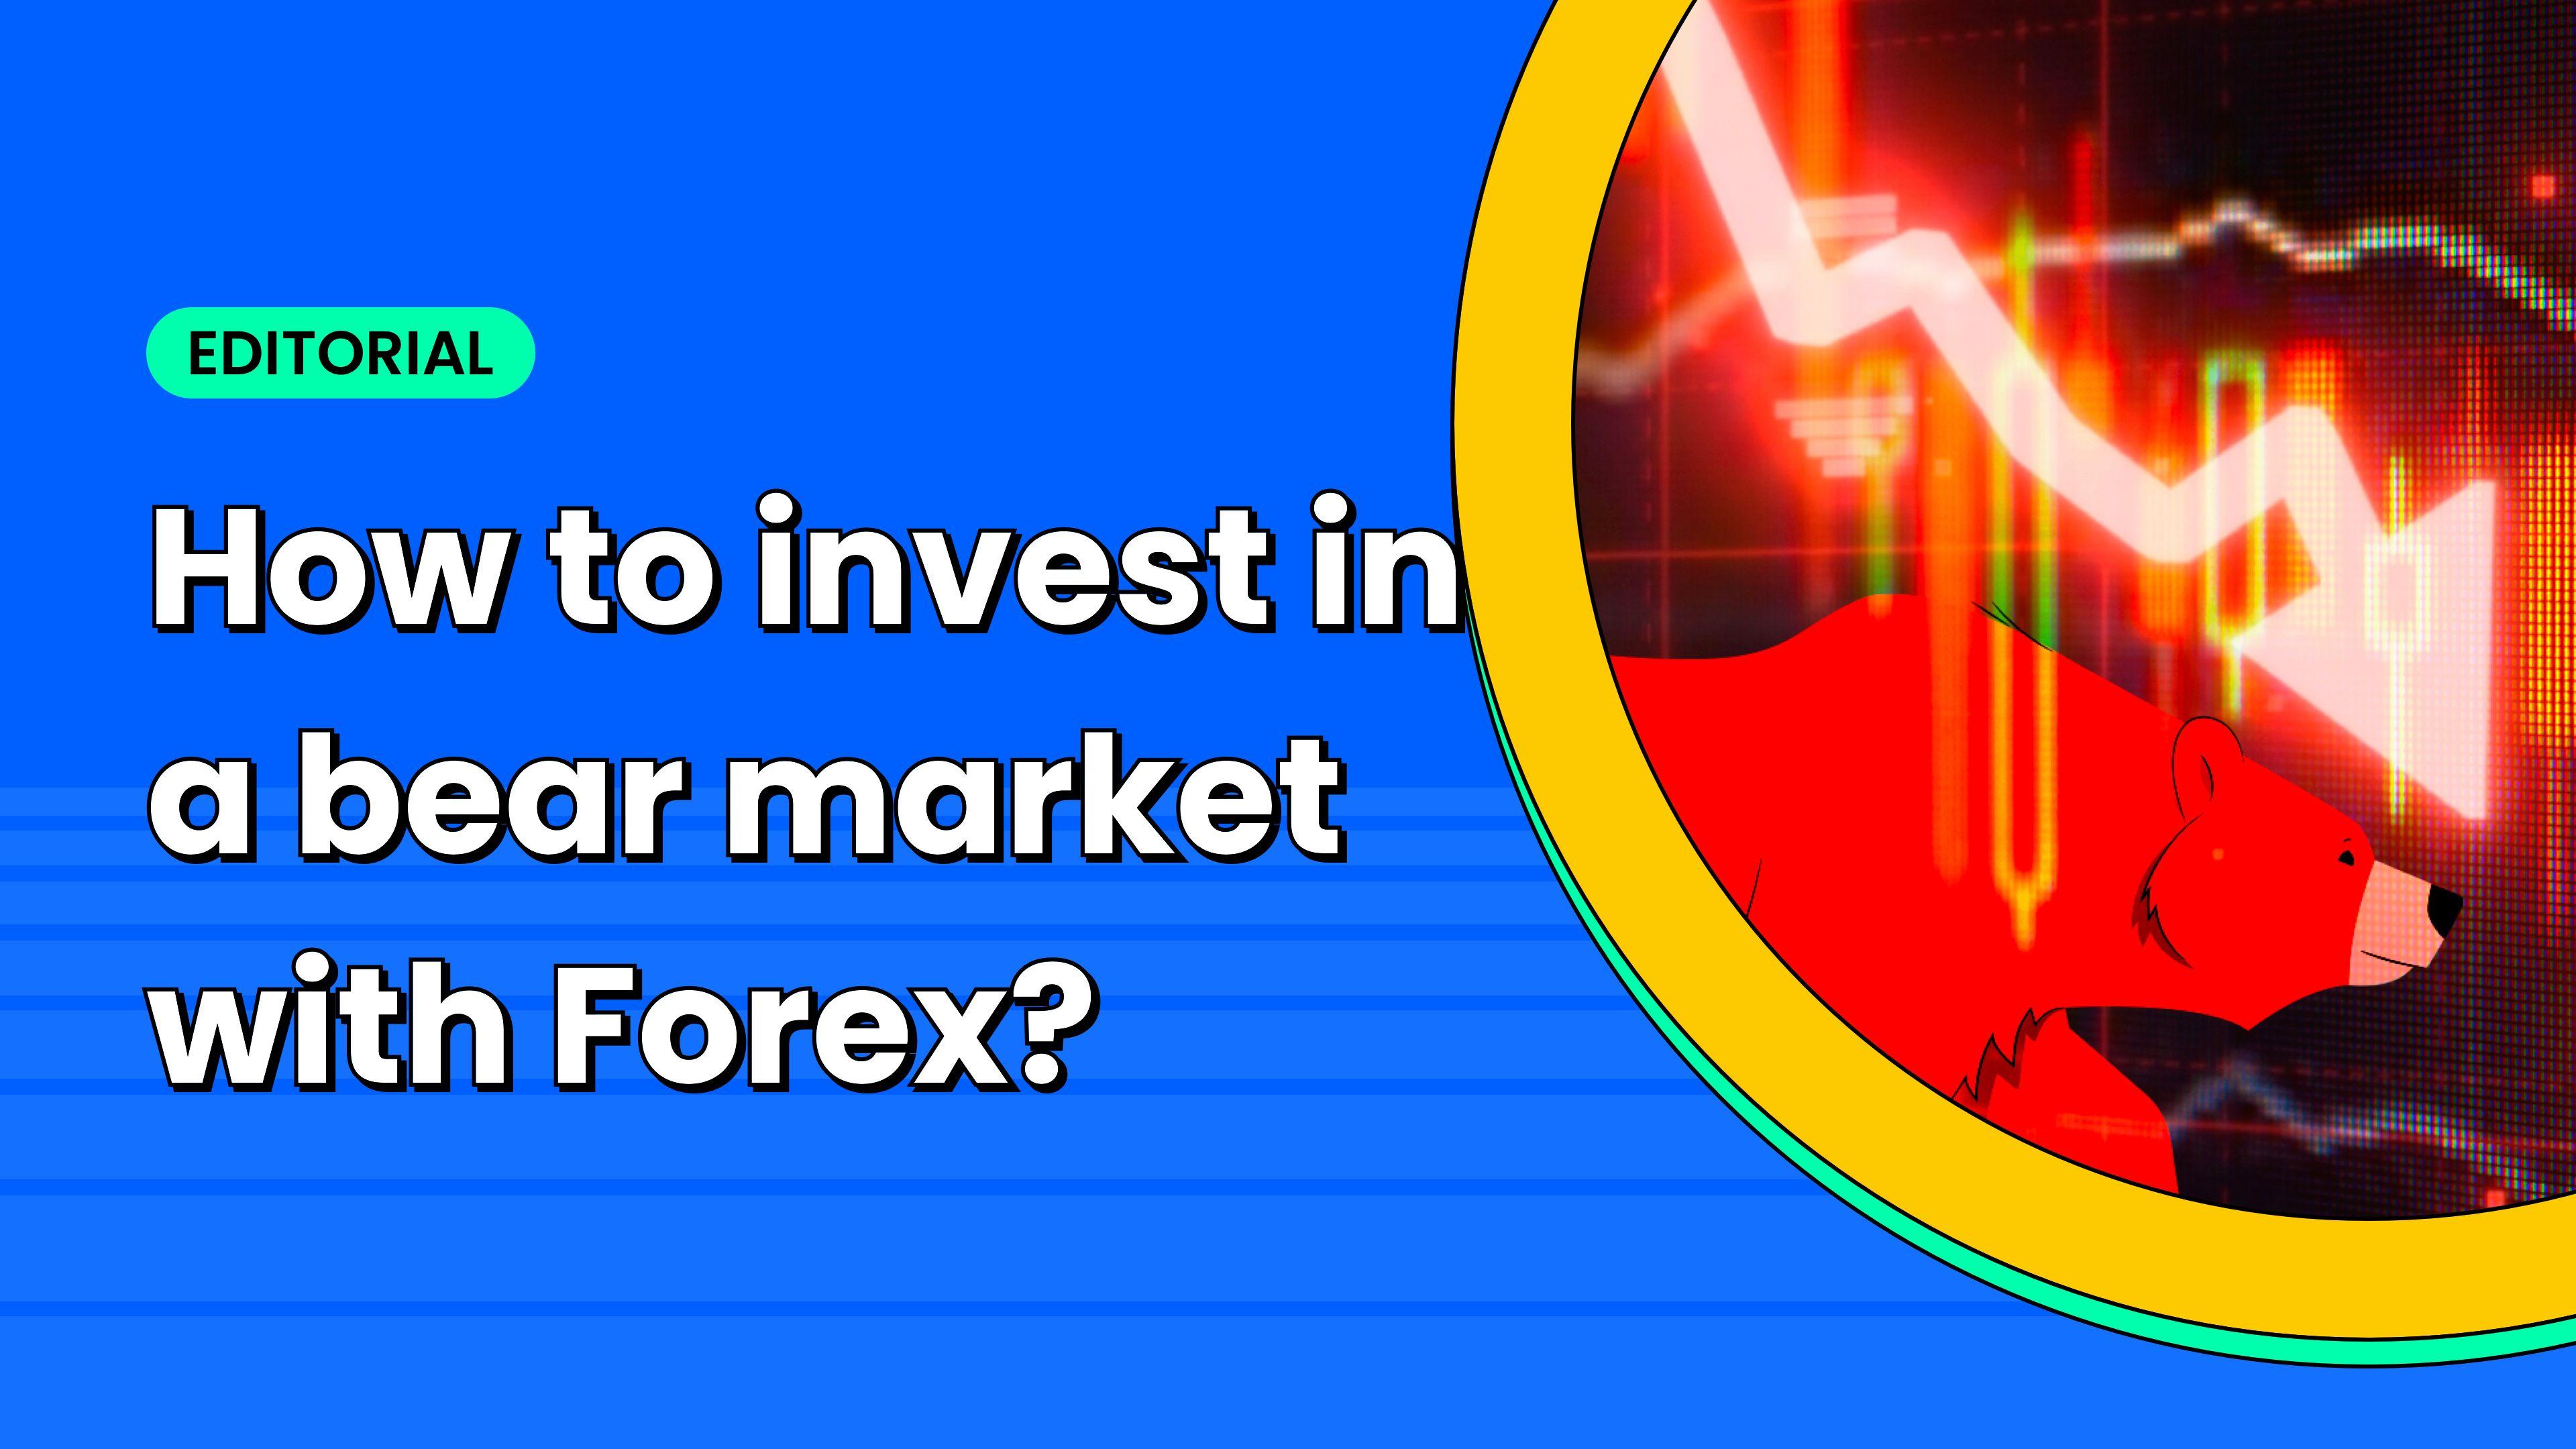 How-to-invest-in-a-bear-market-with-Forex-Feature-Image-SOE2K.png